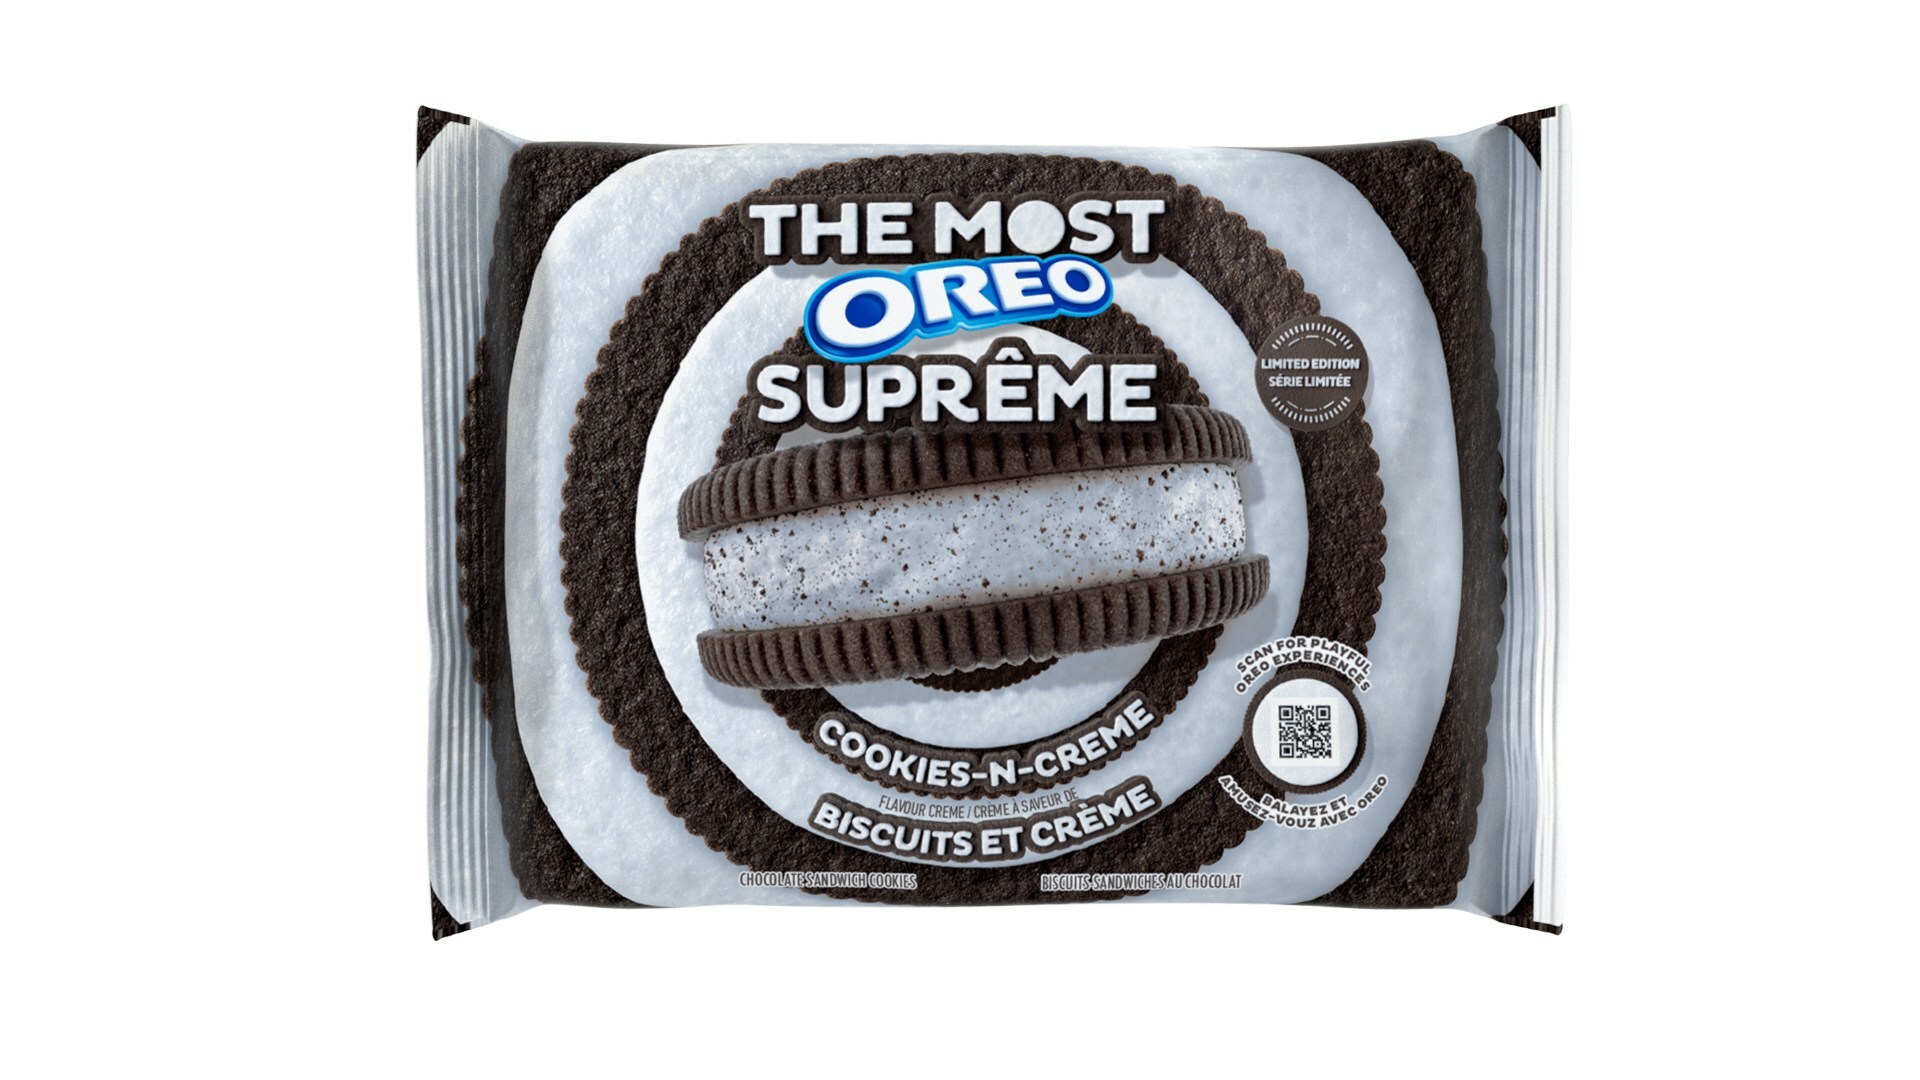 Oreo is launching a Metaverse sport in Canada to advertise its new cookie